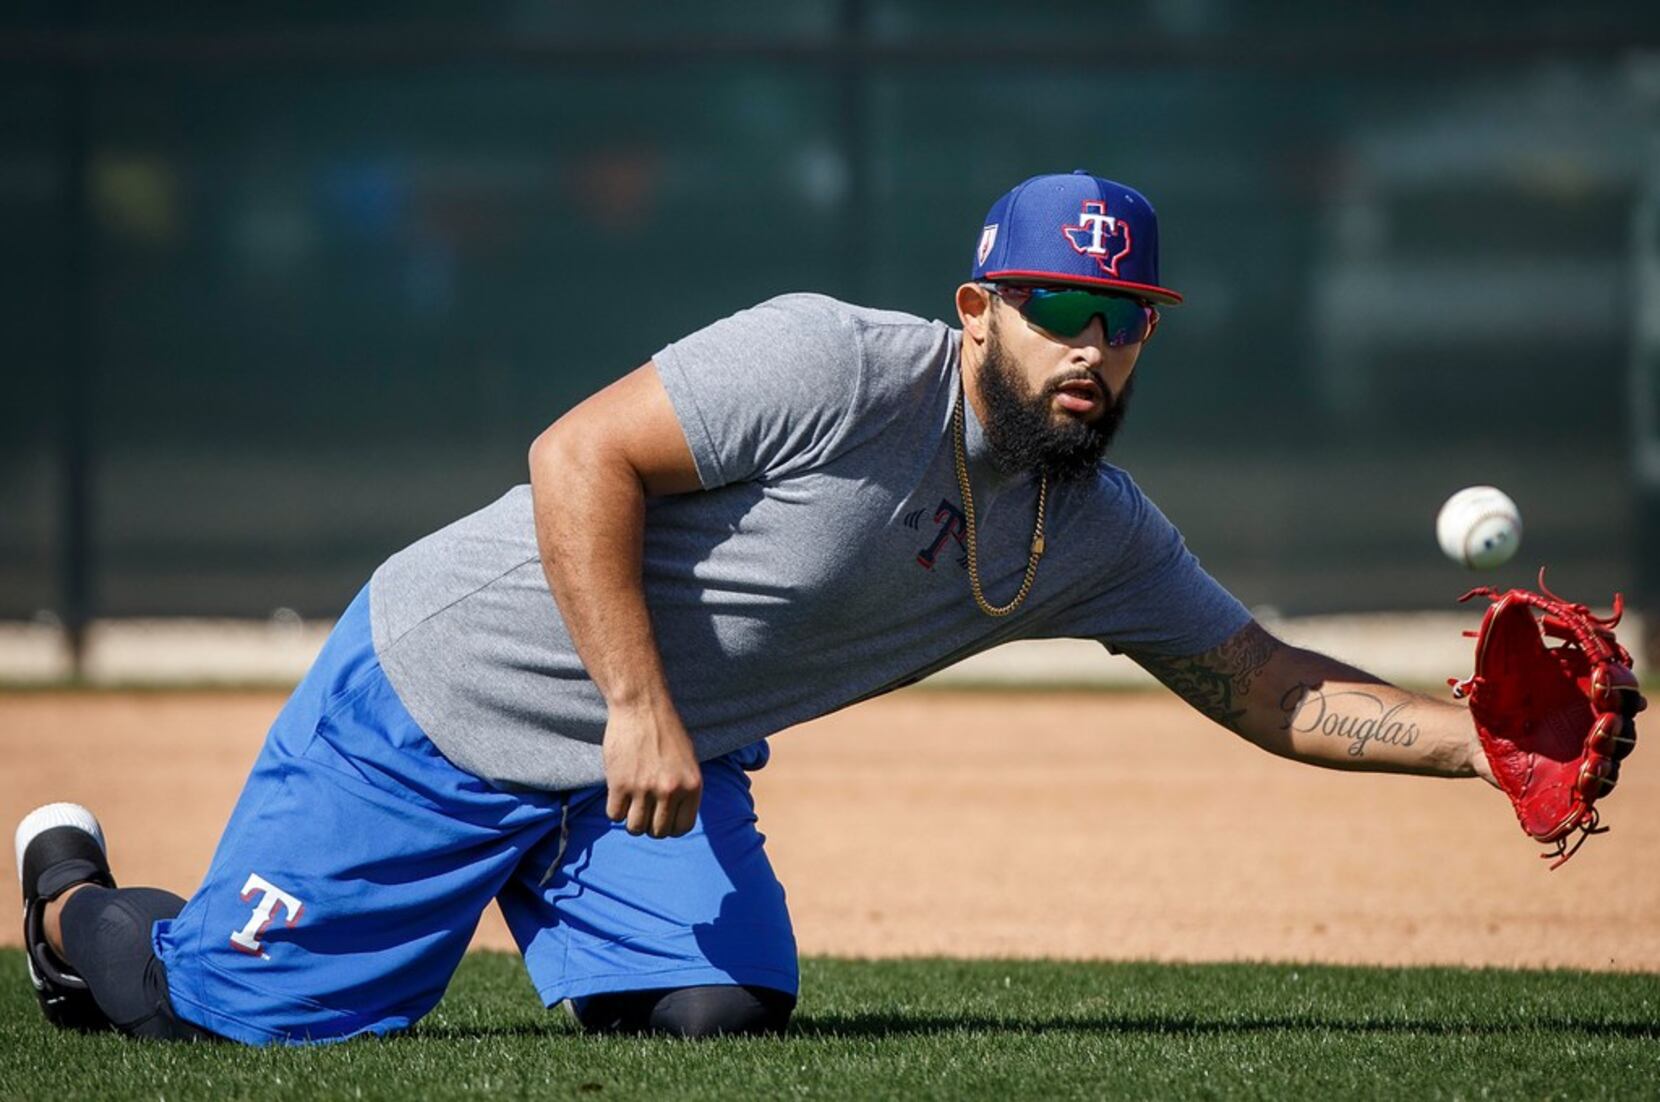 Yankees second baseman Rougned Odor has made notable improvements